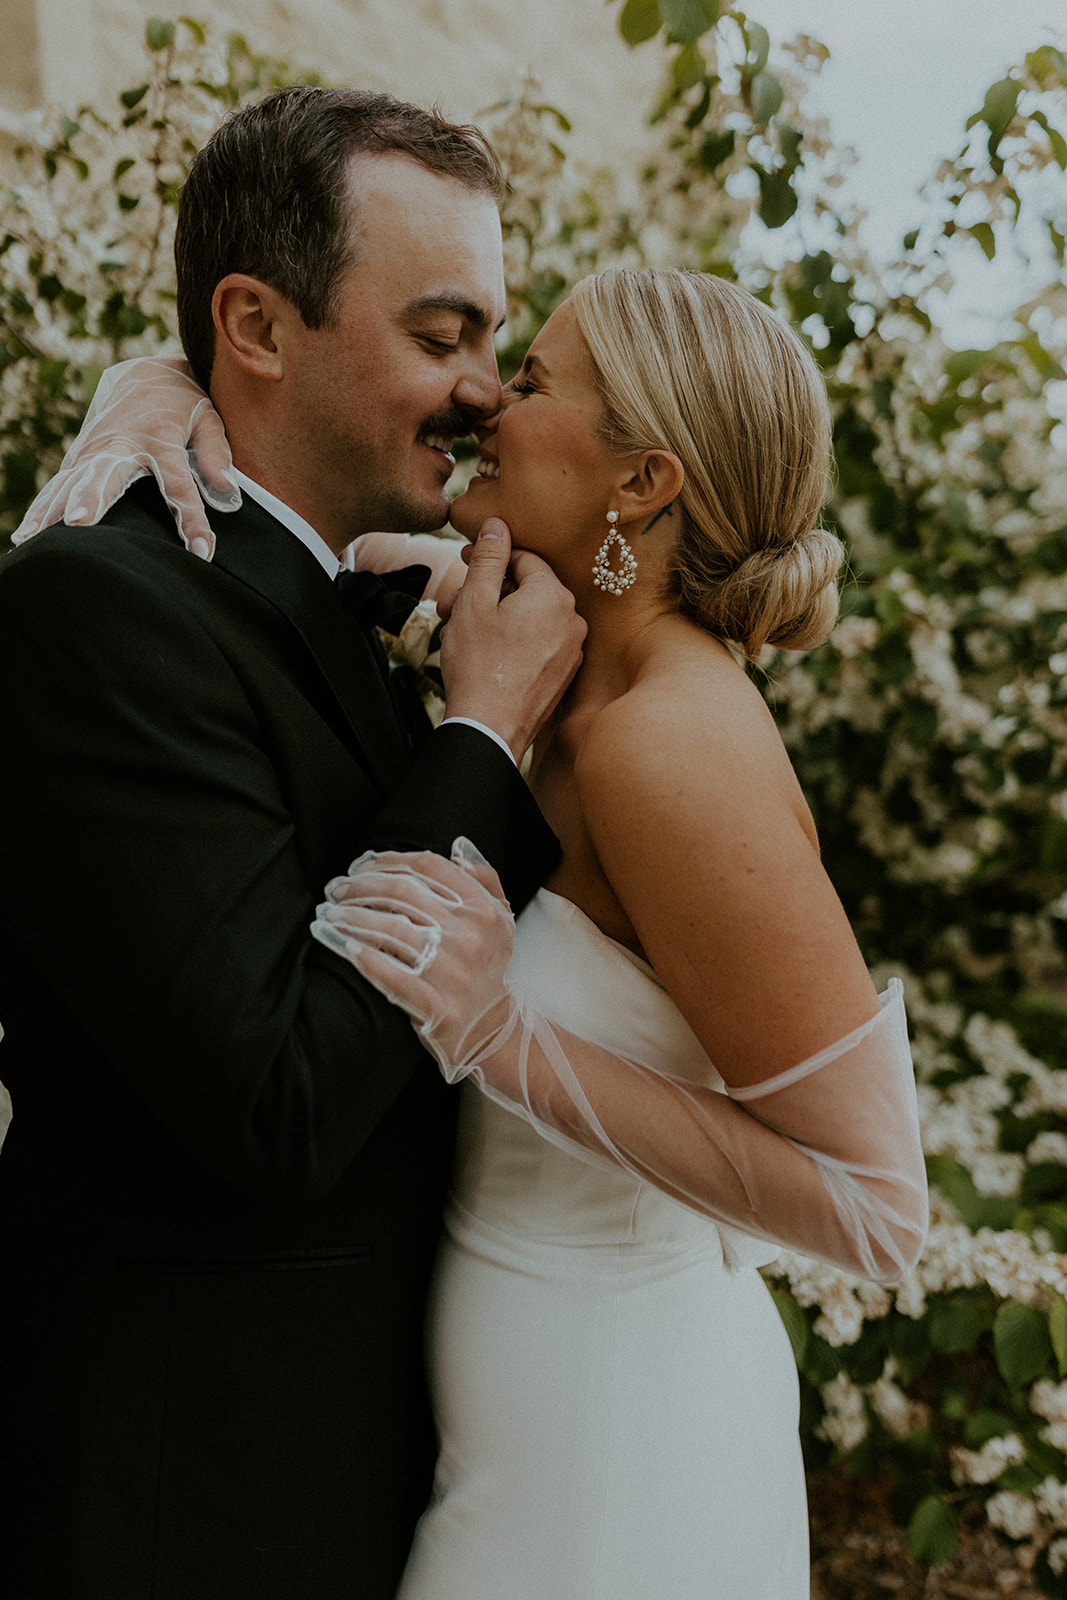 How to Choose A Wedding Photographer That's Perfect For You. Couple smiling as they lean in for a kiss.